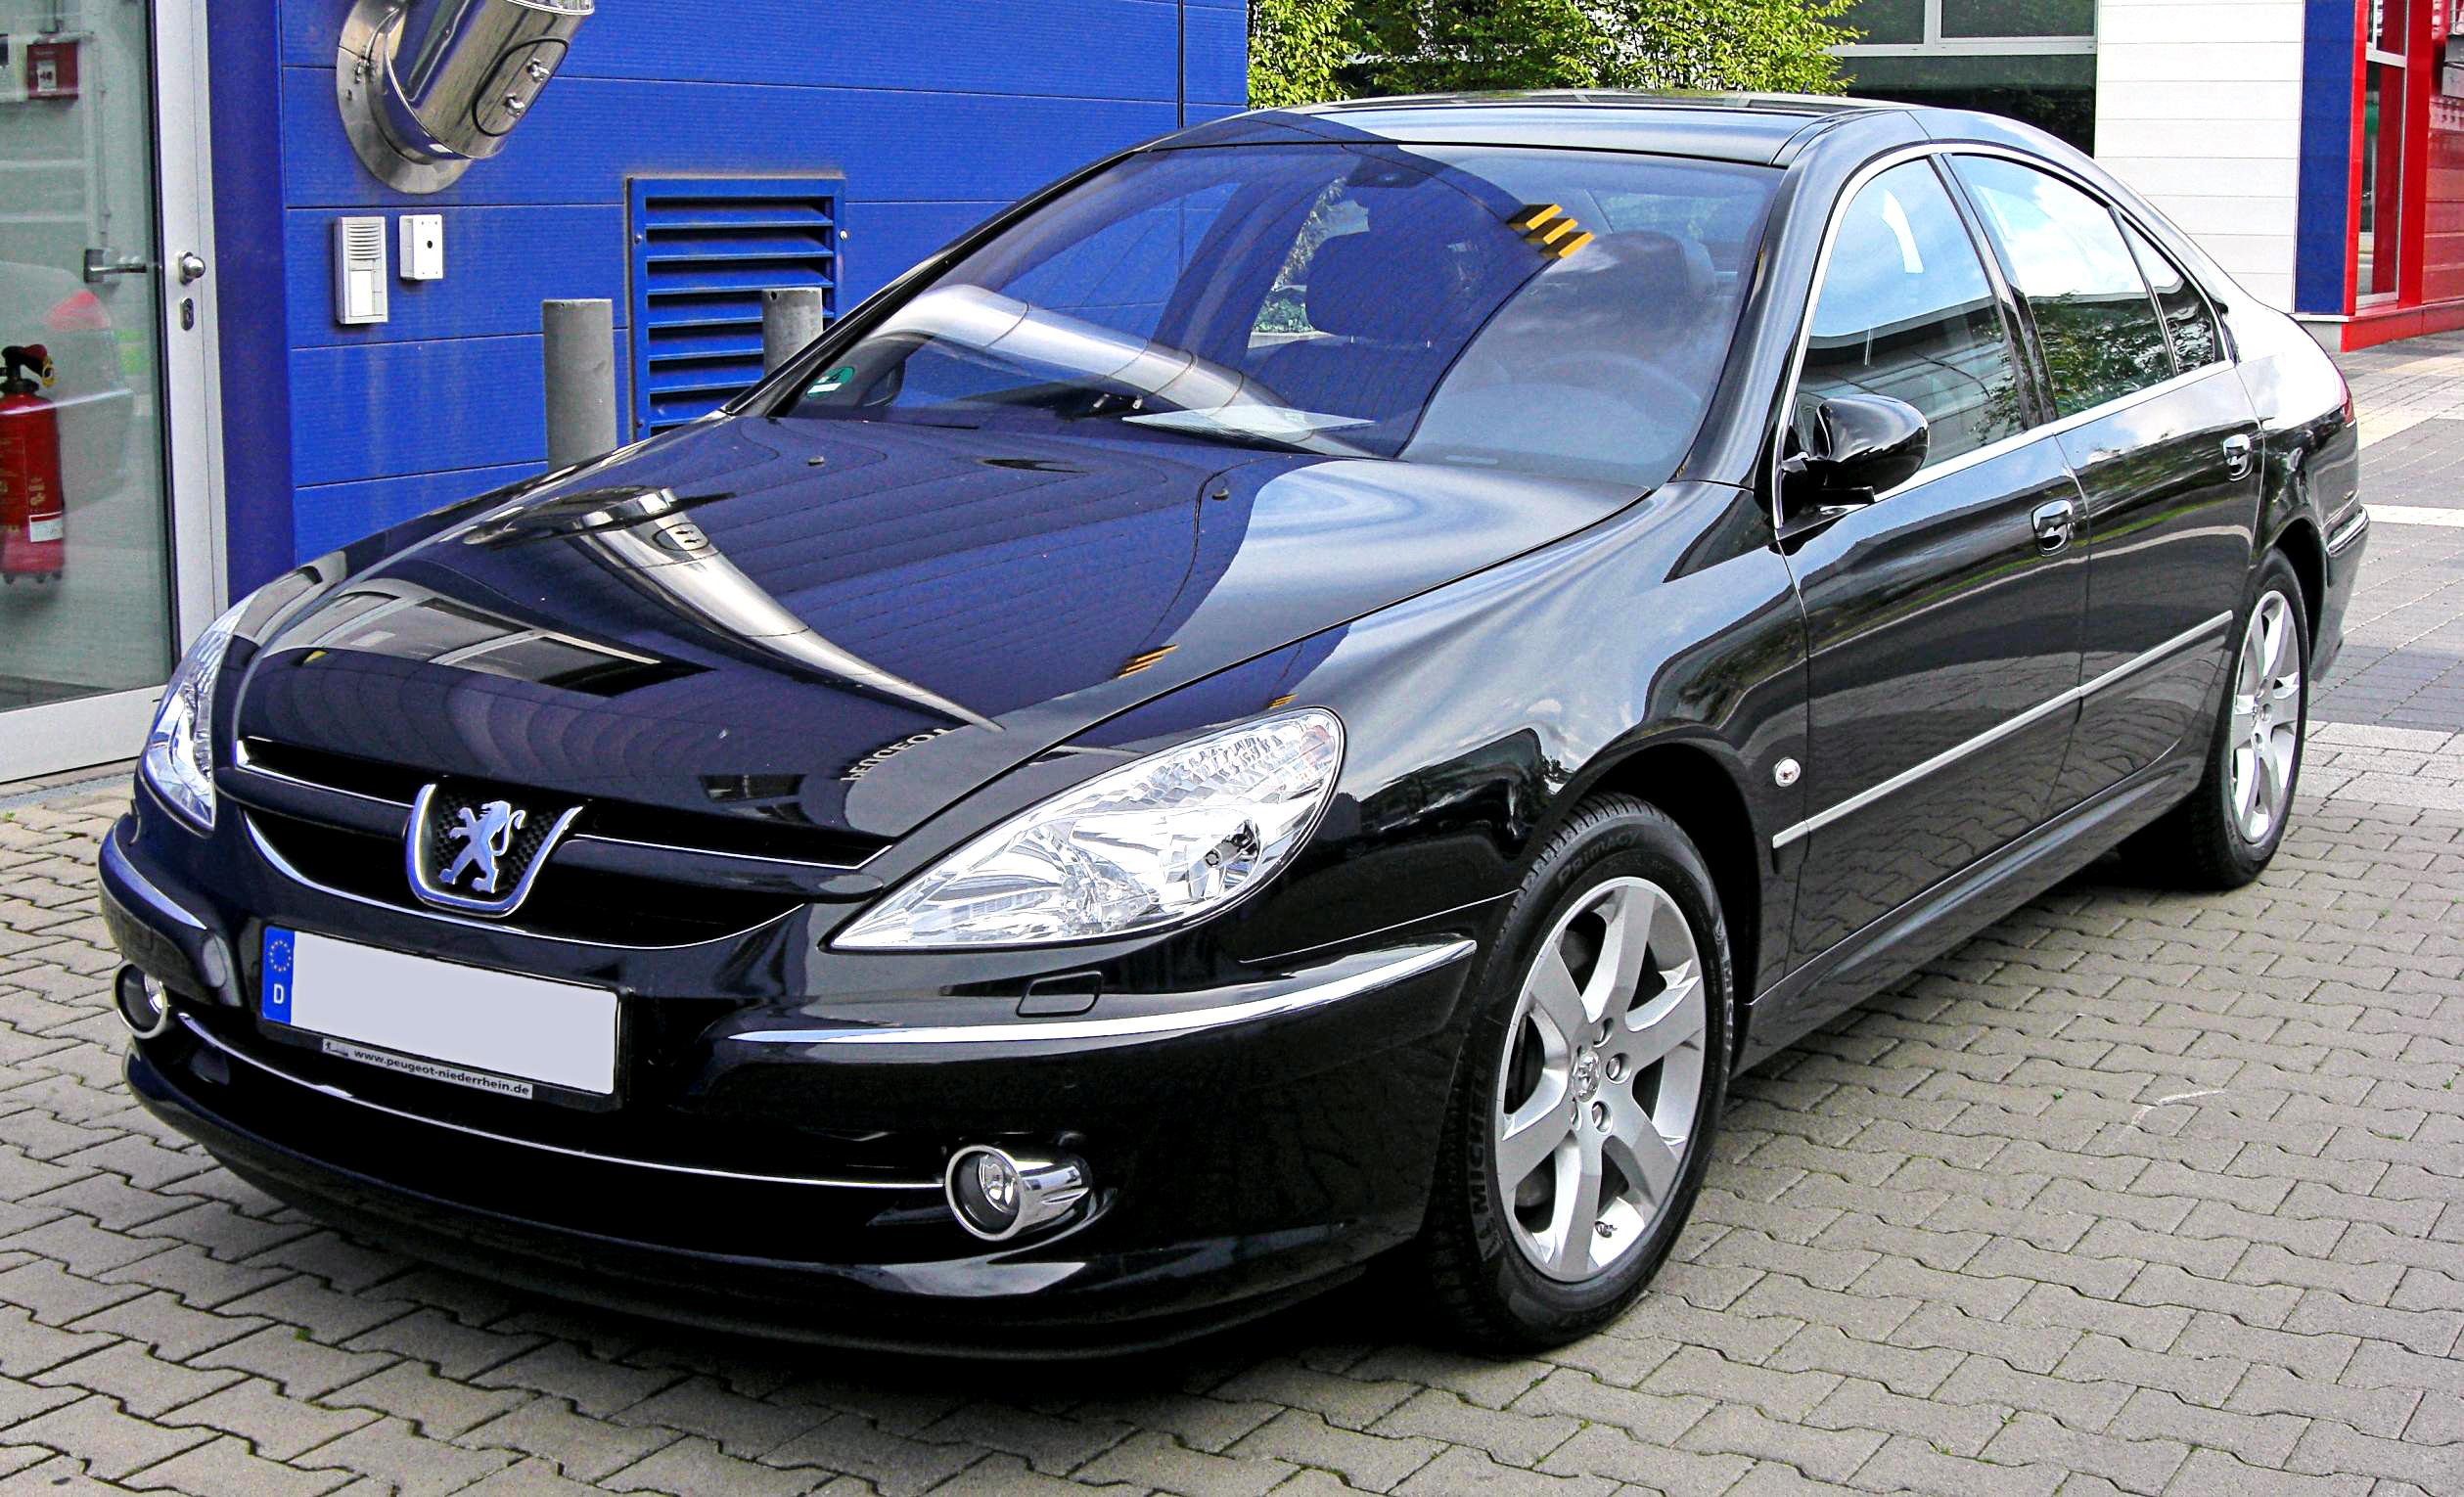 Peugeot 607 Technical Specifications And Fuel Economy